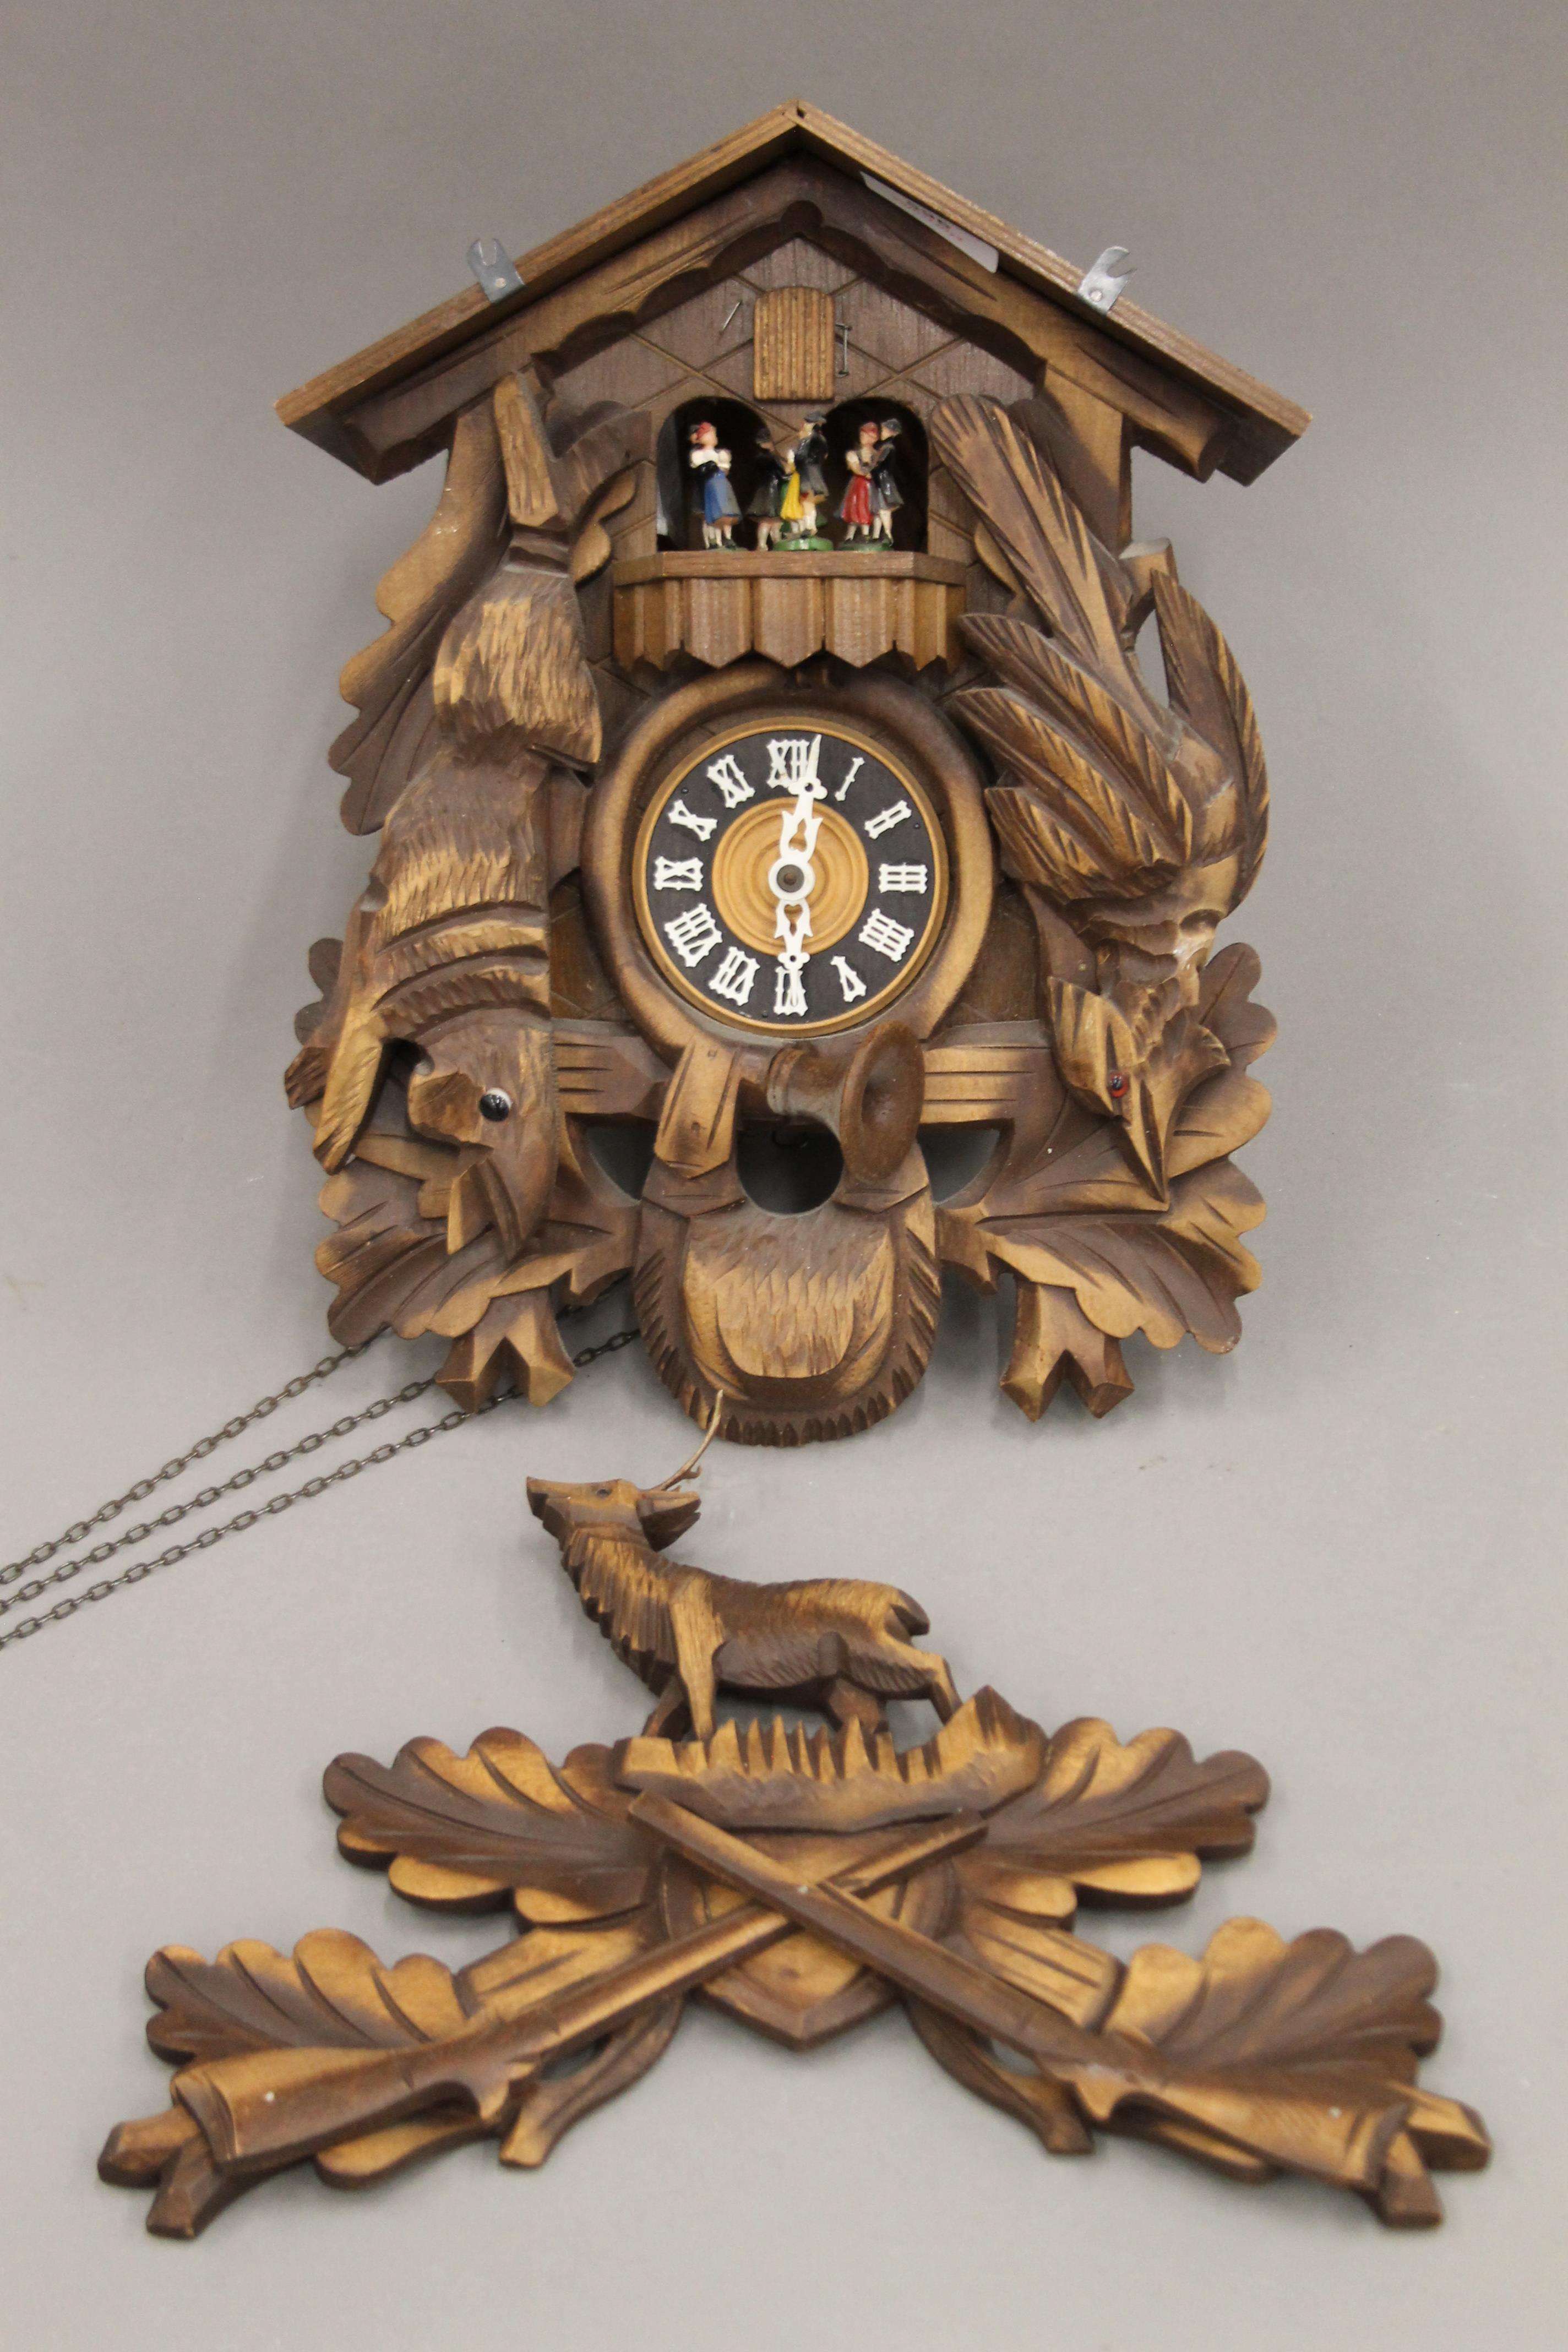 A Blackforest cuckoo clock with roundabout. Approximately 49 cm high.